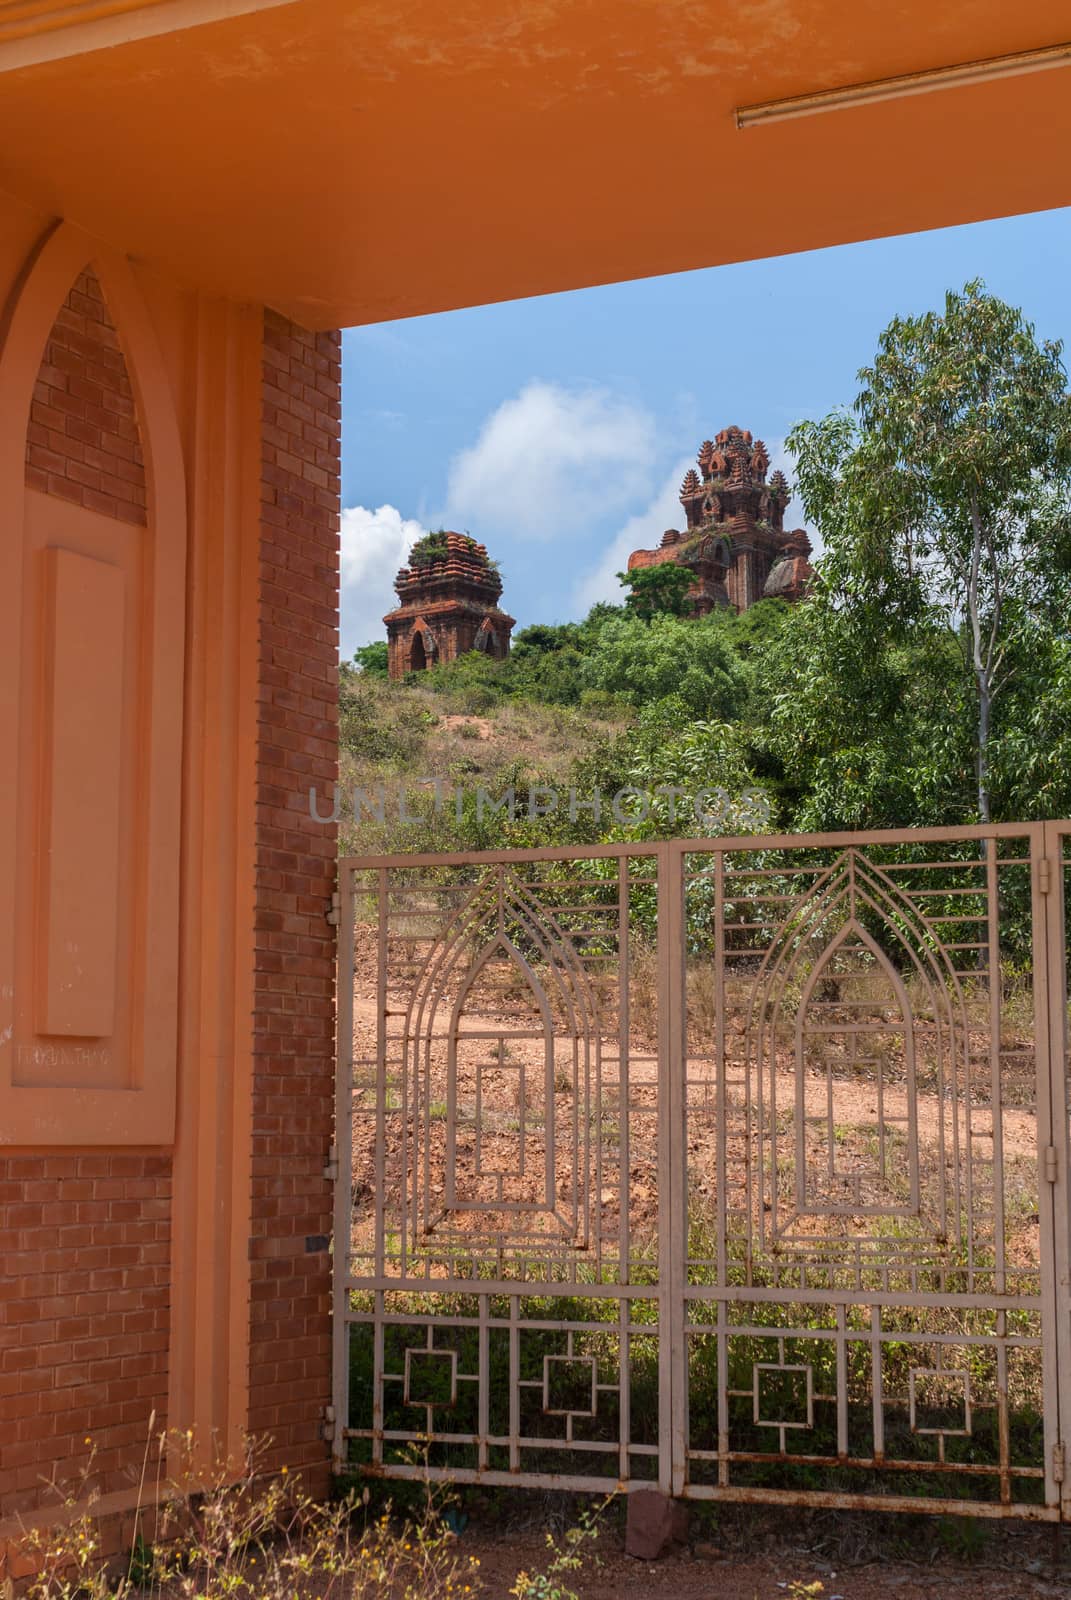 The Banh It Cham towers seen through the entrance gate. by Claudine